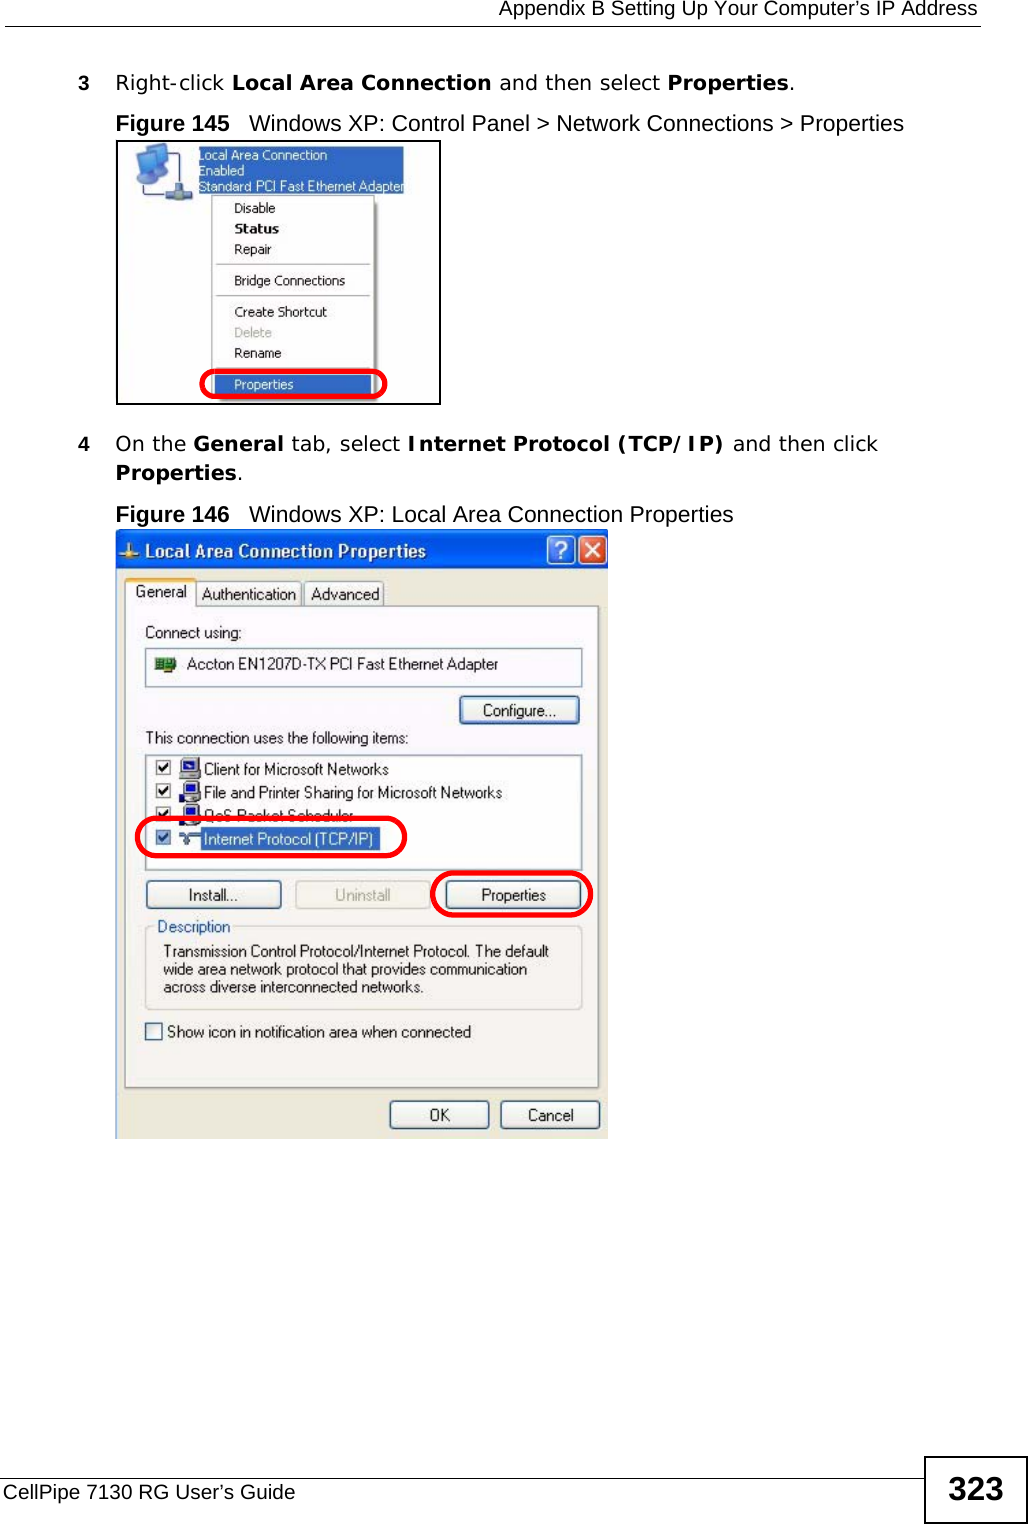  Appendix B Setting Up Your Computer’s IP AddressCellPipe 7130 RG User’s Guide 3233Right-click Local Area Connection and then select Properties.Figure 145   Windows XP: Control Panel &gt; Network Connections &gt; Properties4On the General tab, select Internet Protocol (TCP/IP) and then click Properties.Figure 146   Windows XP: Local Area Connection Properties